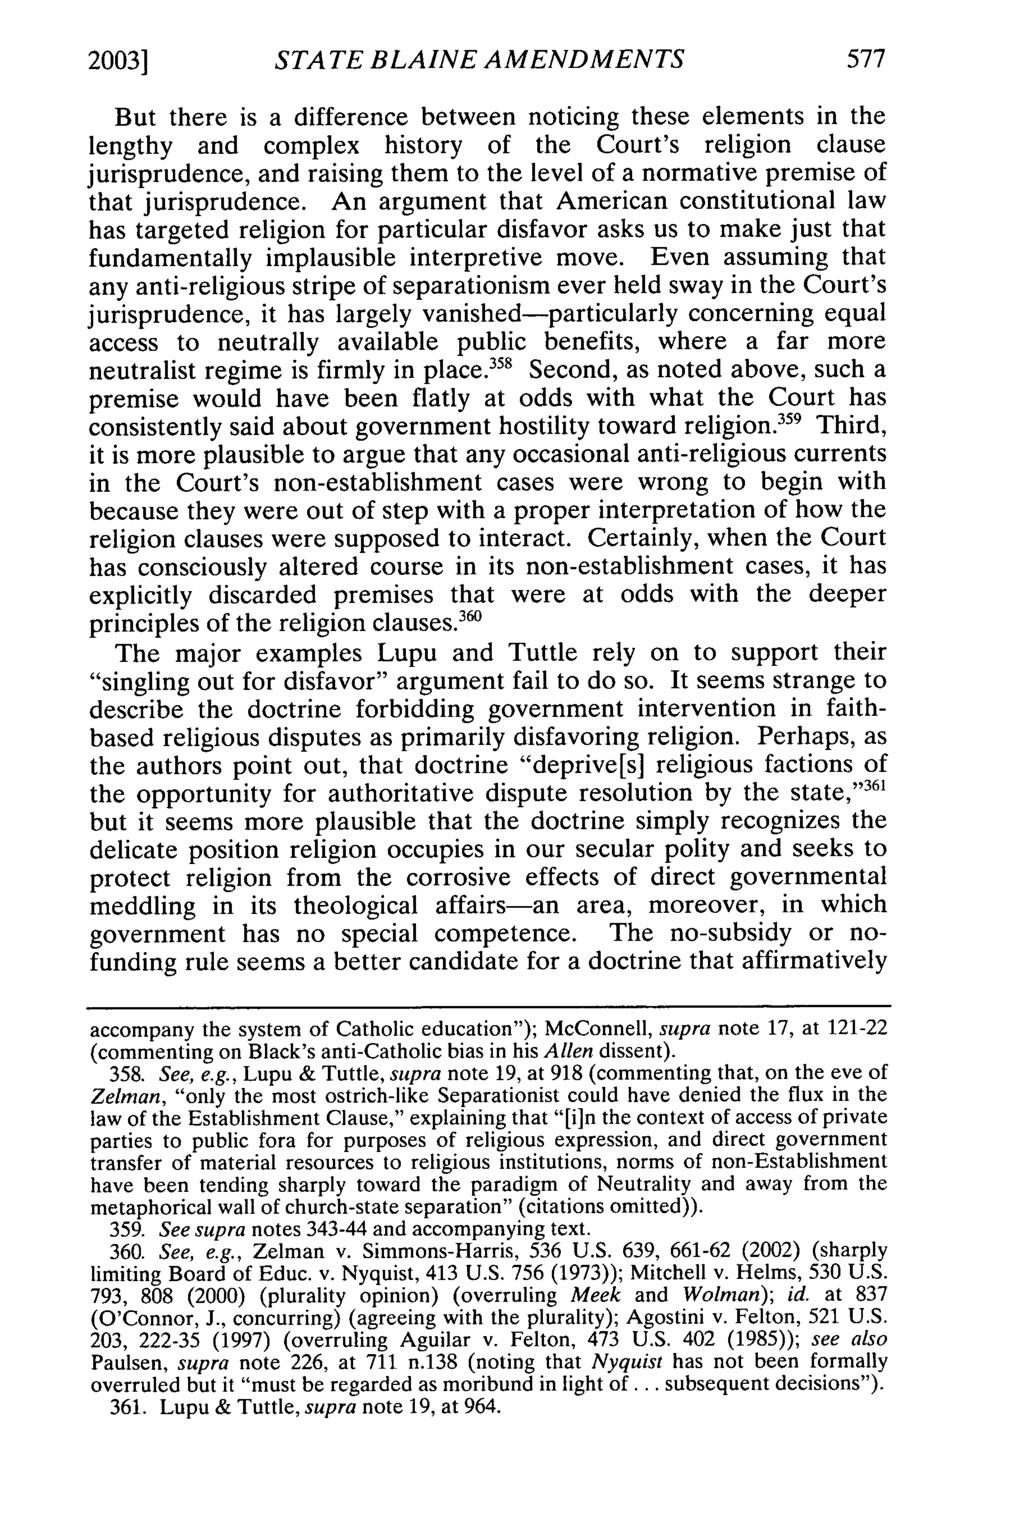 2003] STATE BLAINE AMENDMENTS But there is a difference between noticing these elements in the lengthy and complex history of the Court's religion clause jurisprudence, and raising them to the level